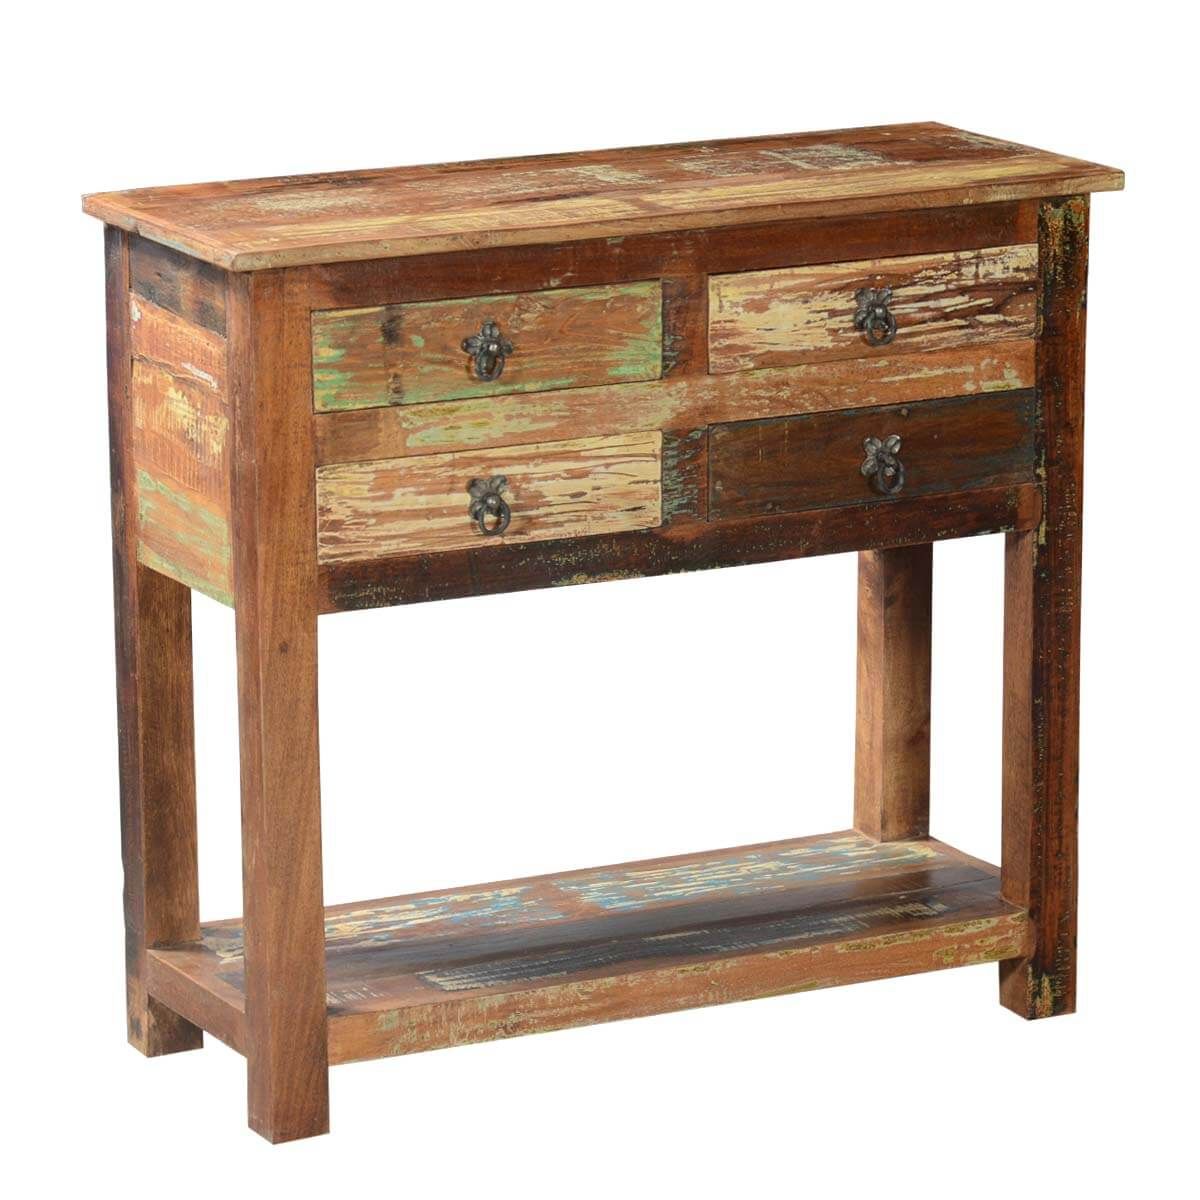 Ashland Rustic Reclaimed Wood 4 Drawer Hallway Console Table Inside Barnwood Console Tables (View 1 of 20)